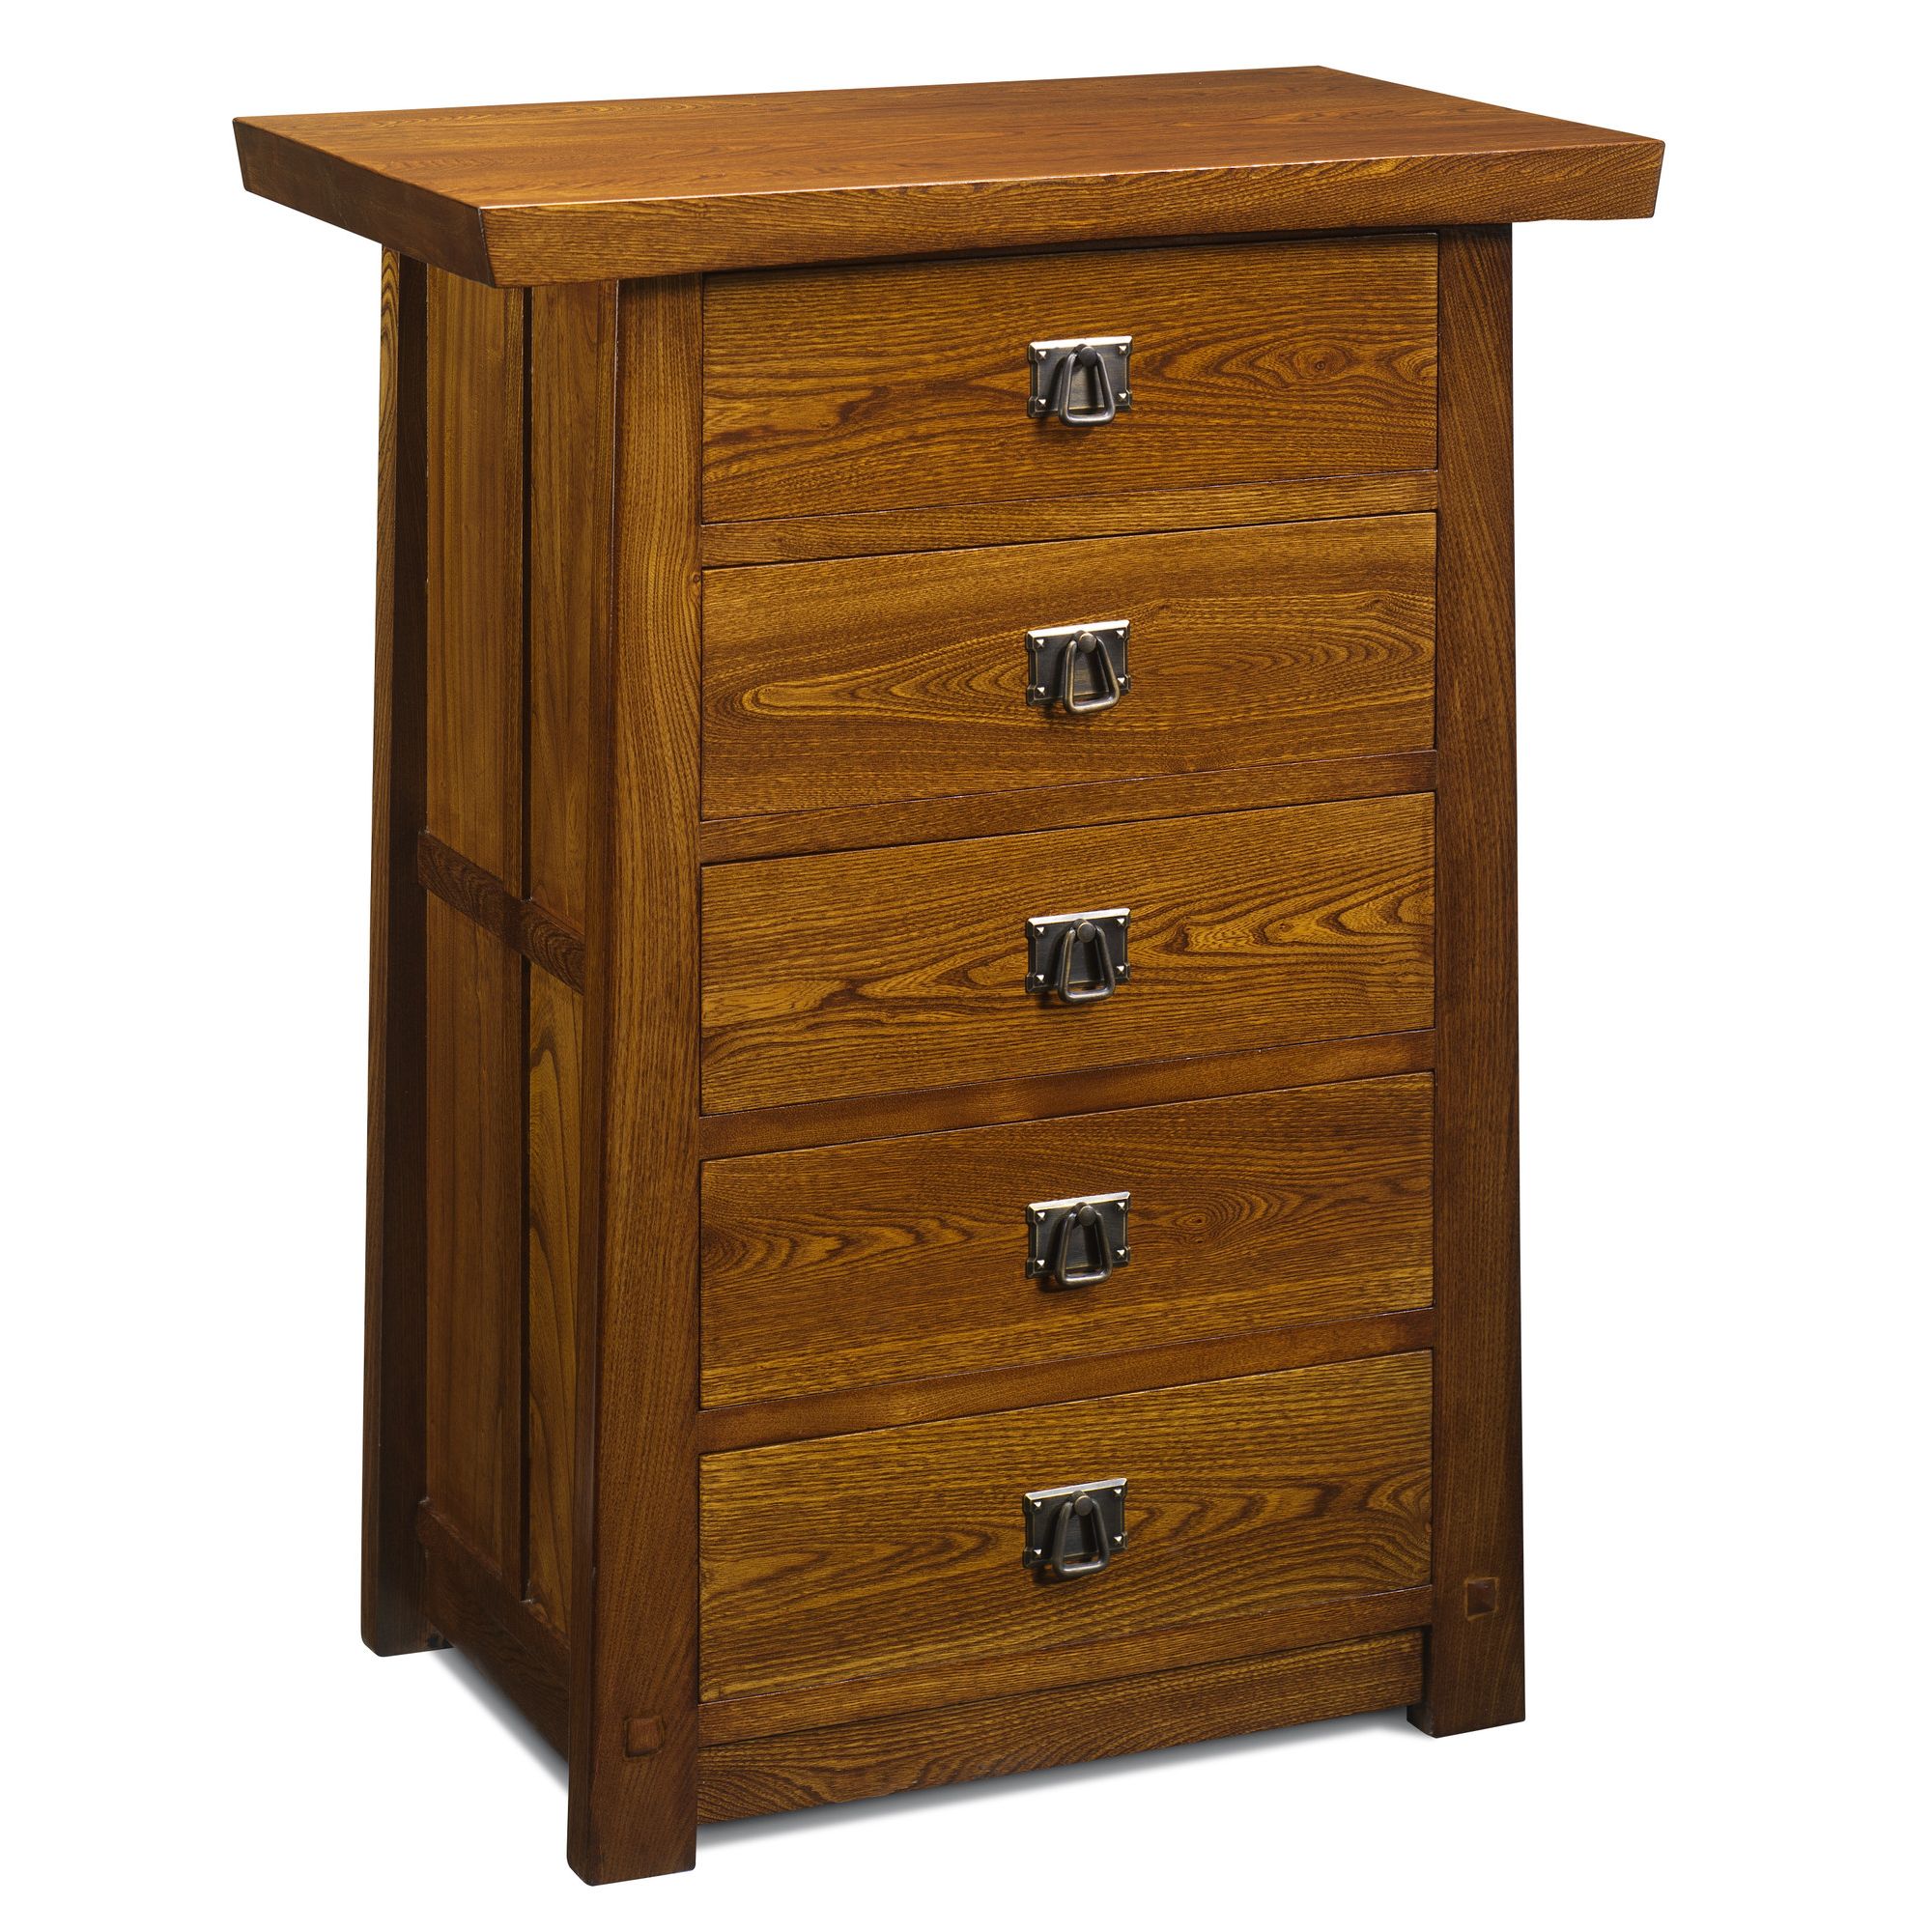 Shimu Asian Contemporary Tall Chest at Tesco Direct